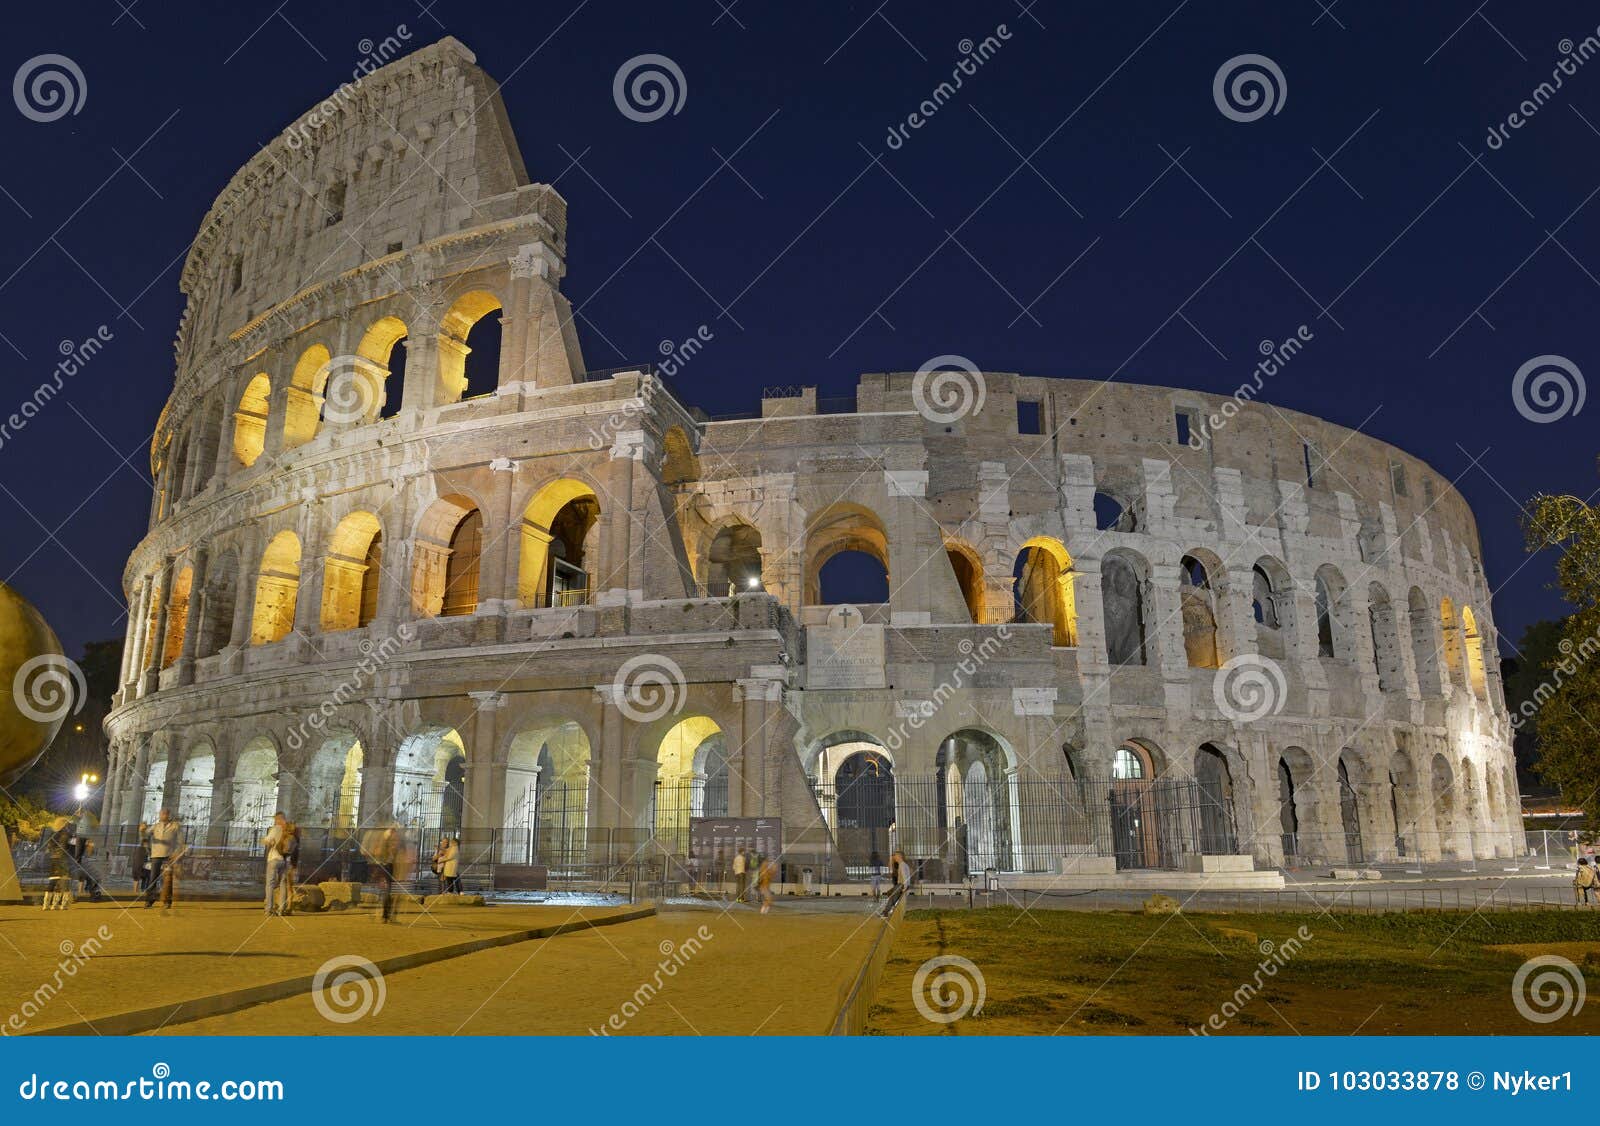 the roman colosseum, a place where gladiators fought as well as being a venue for public entertainment, rome